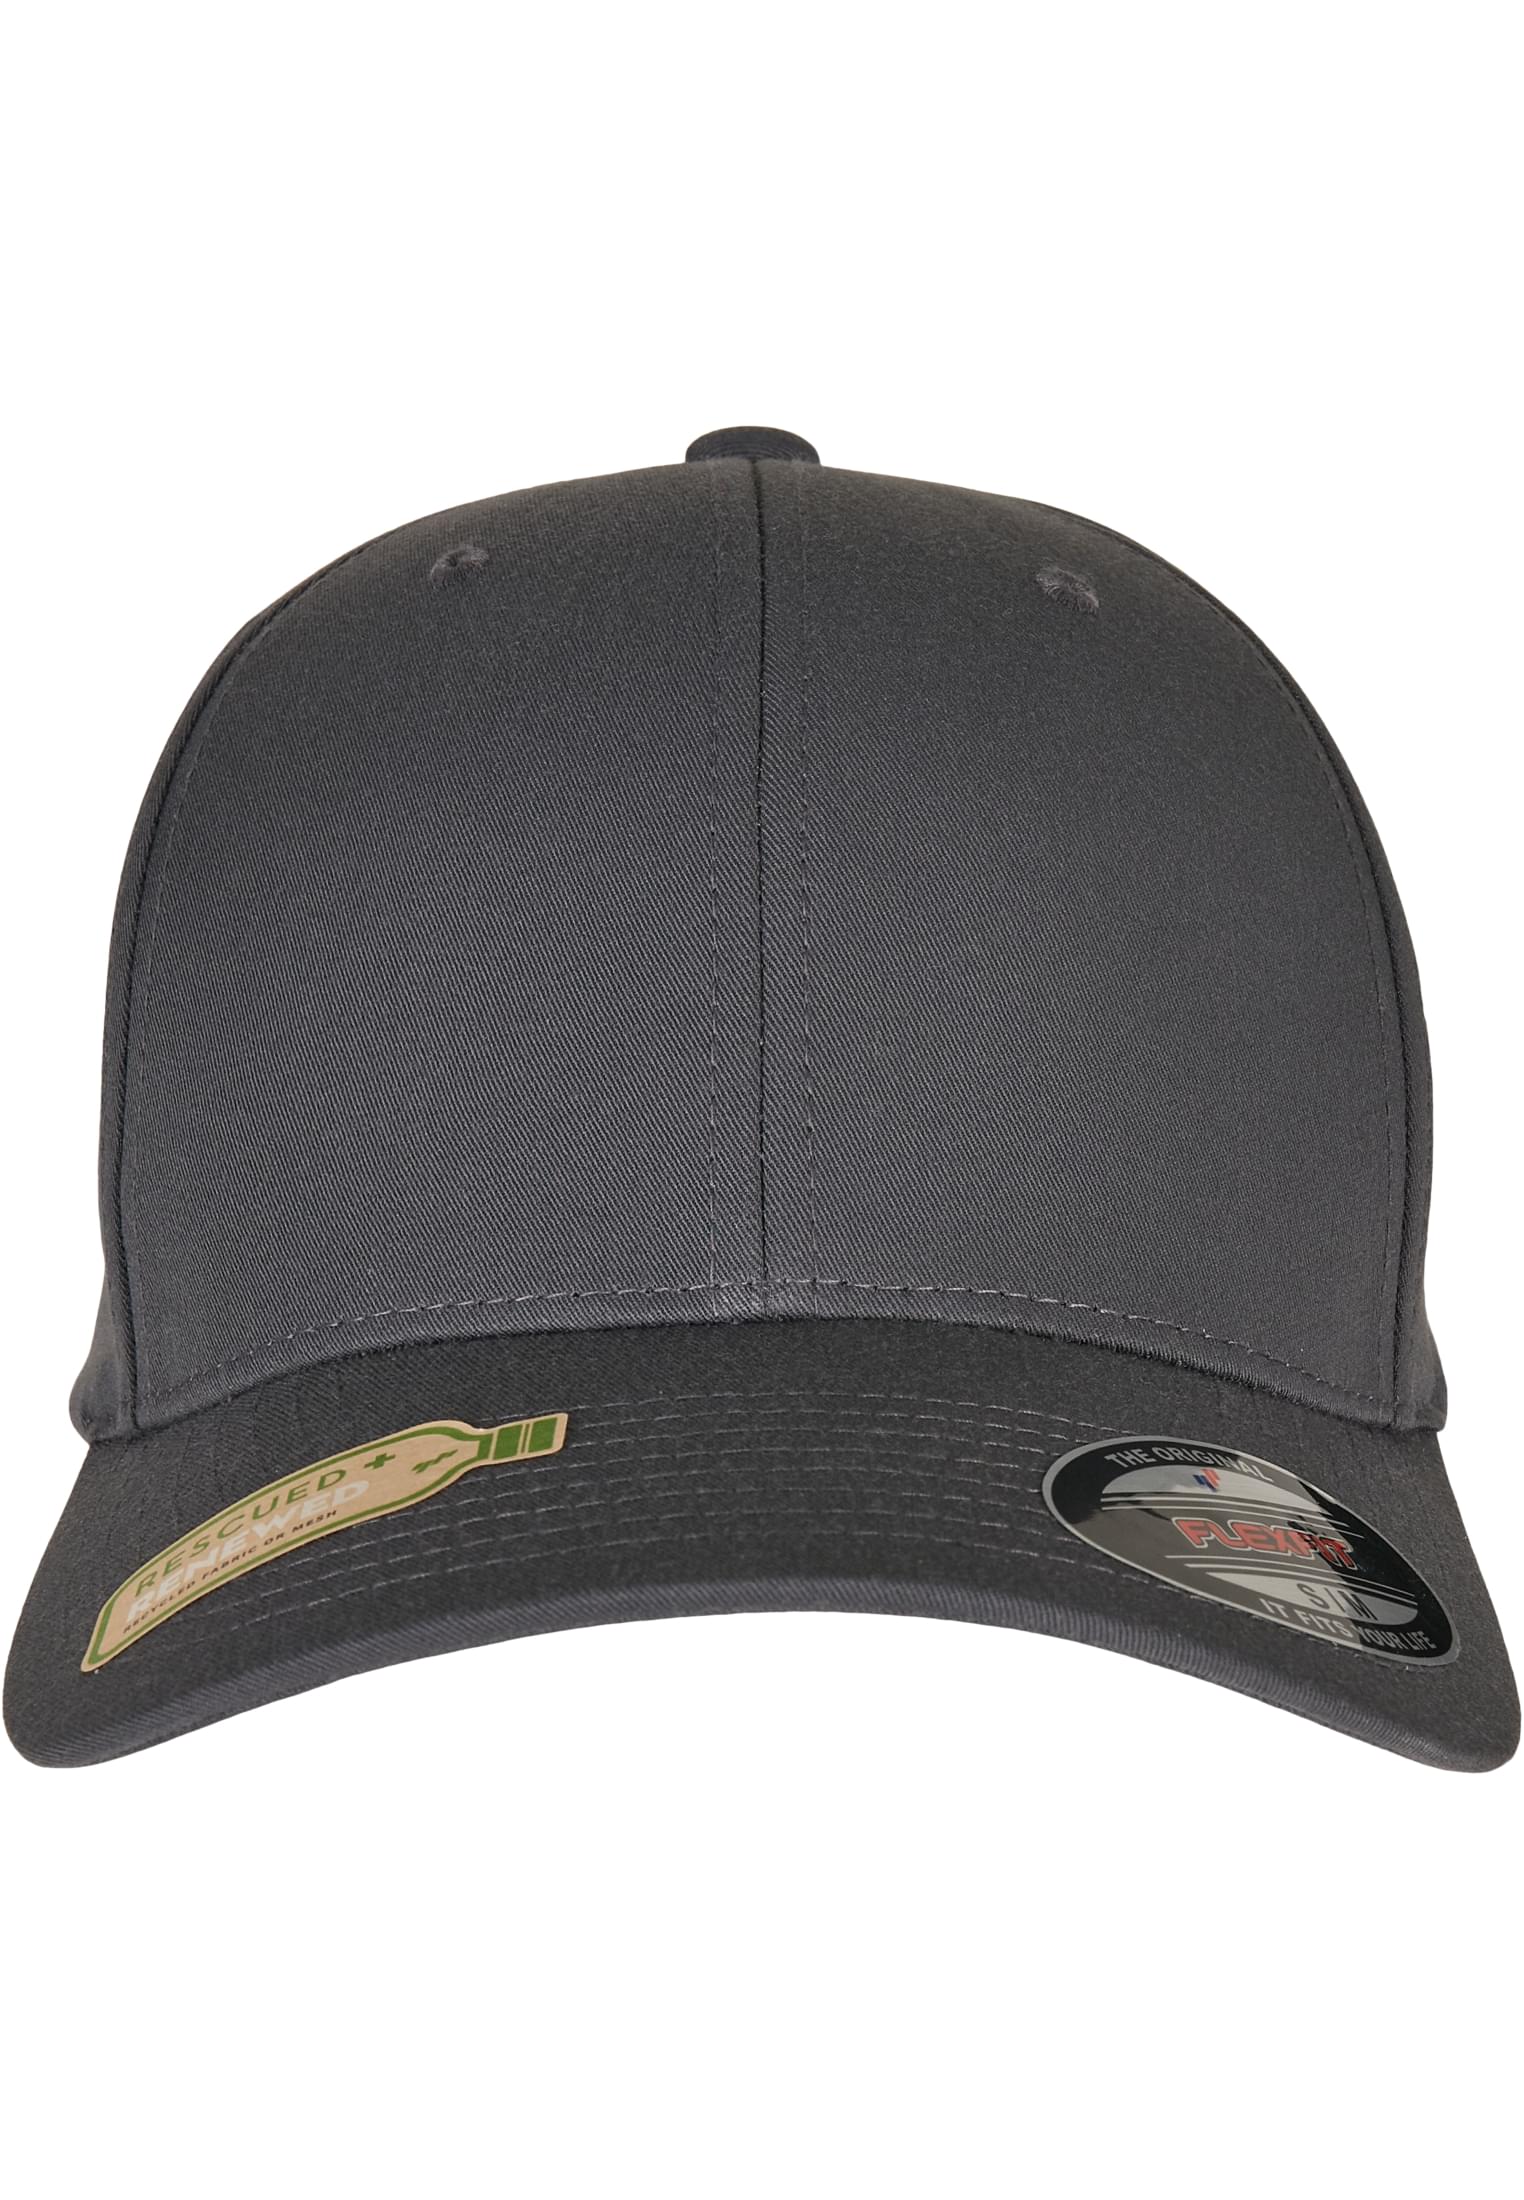 Cap-6277RP Polyester Recycled Flexfit